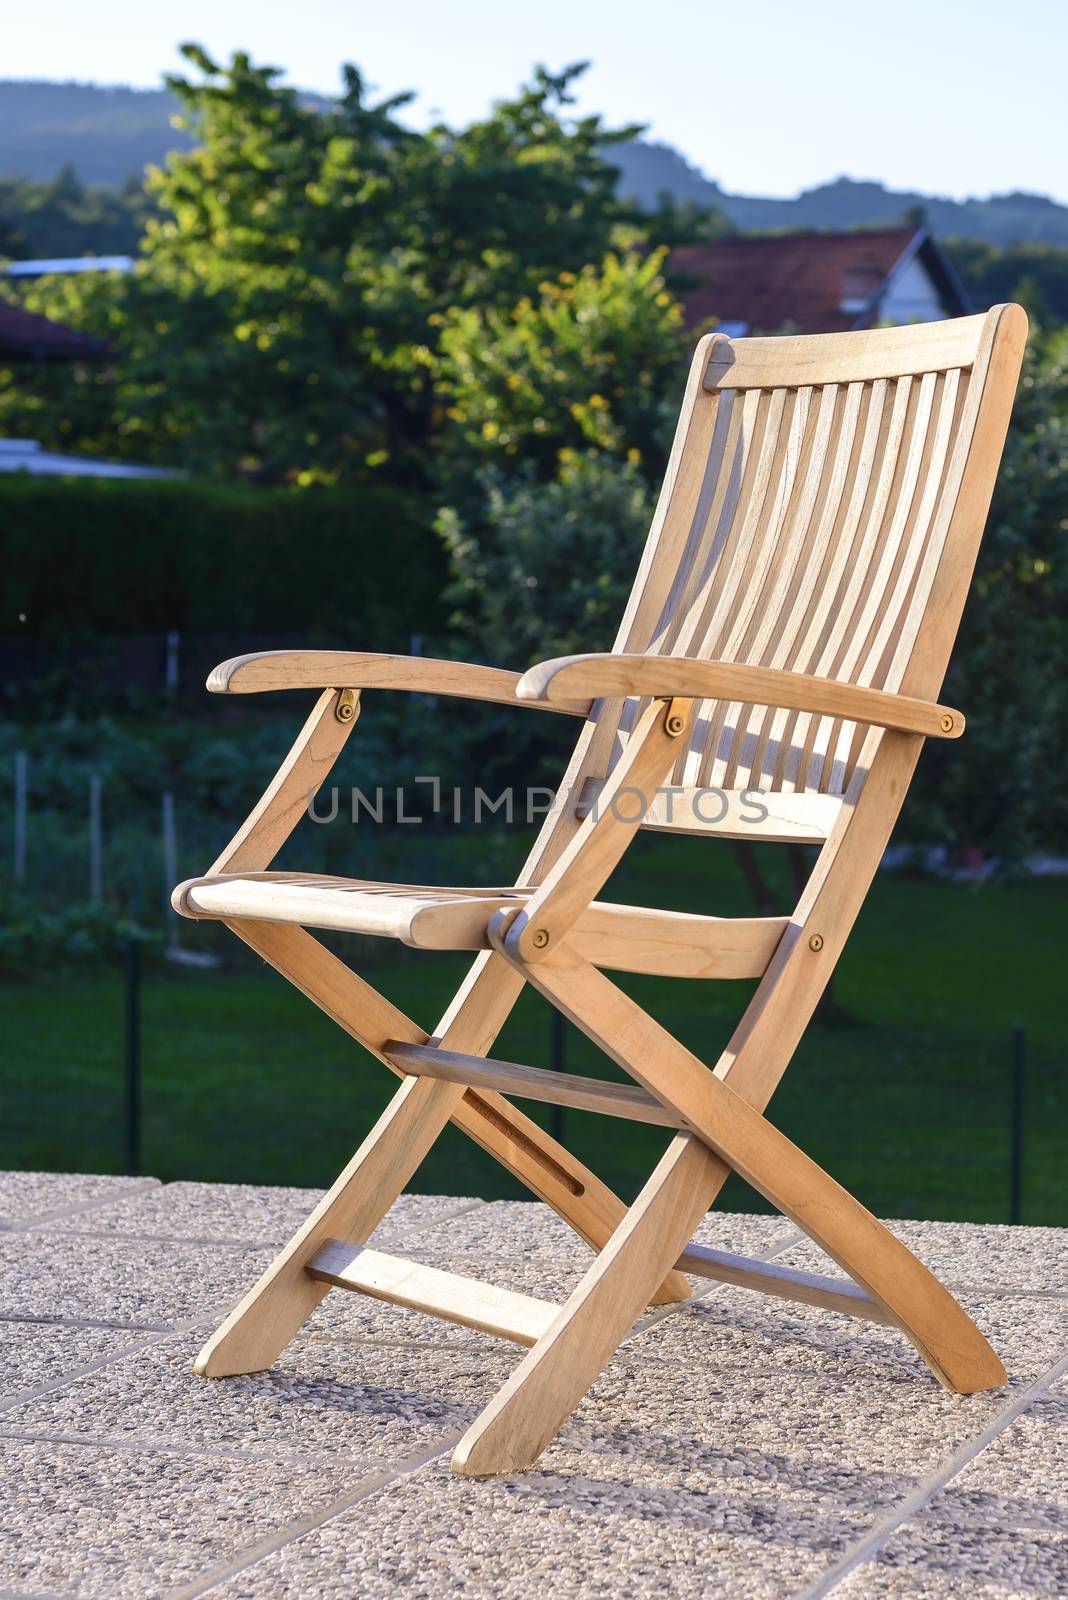 Foldable deck chair on outdoor terrace, made of teak tropical hardwood